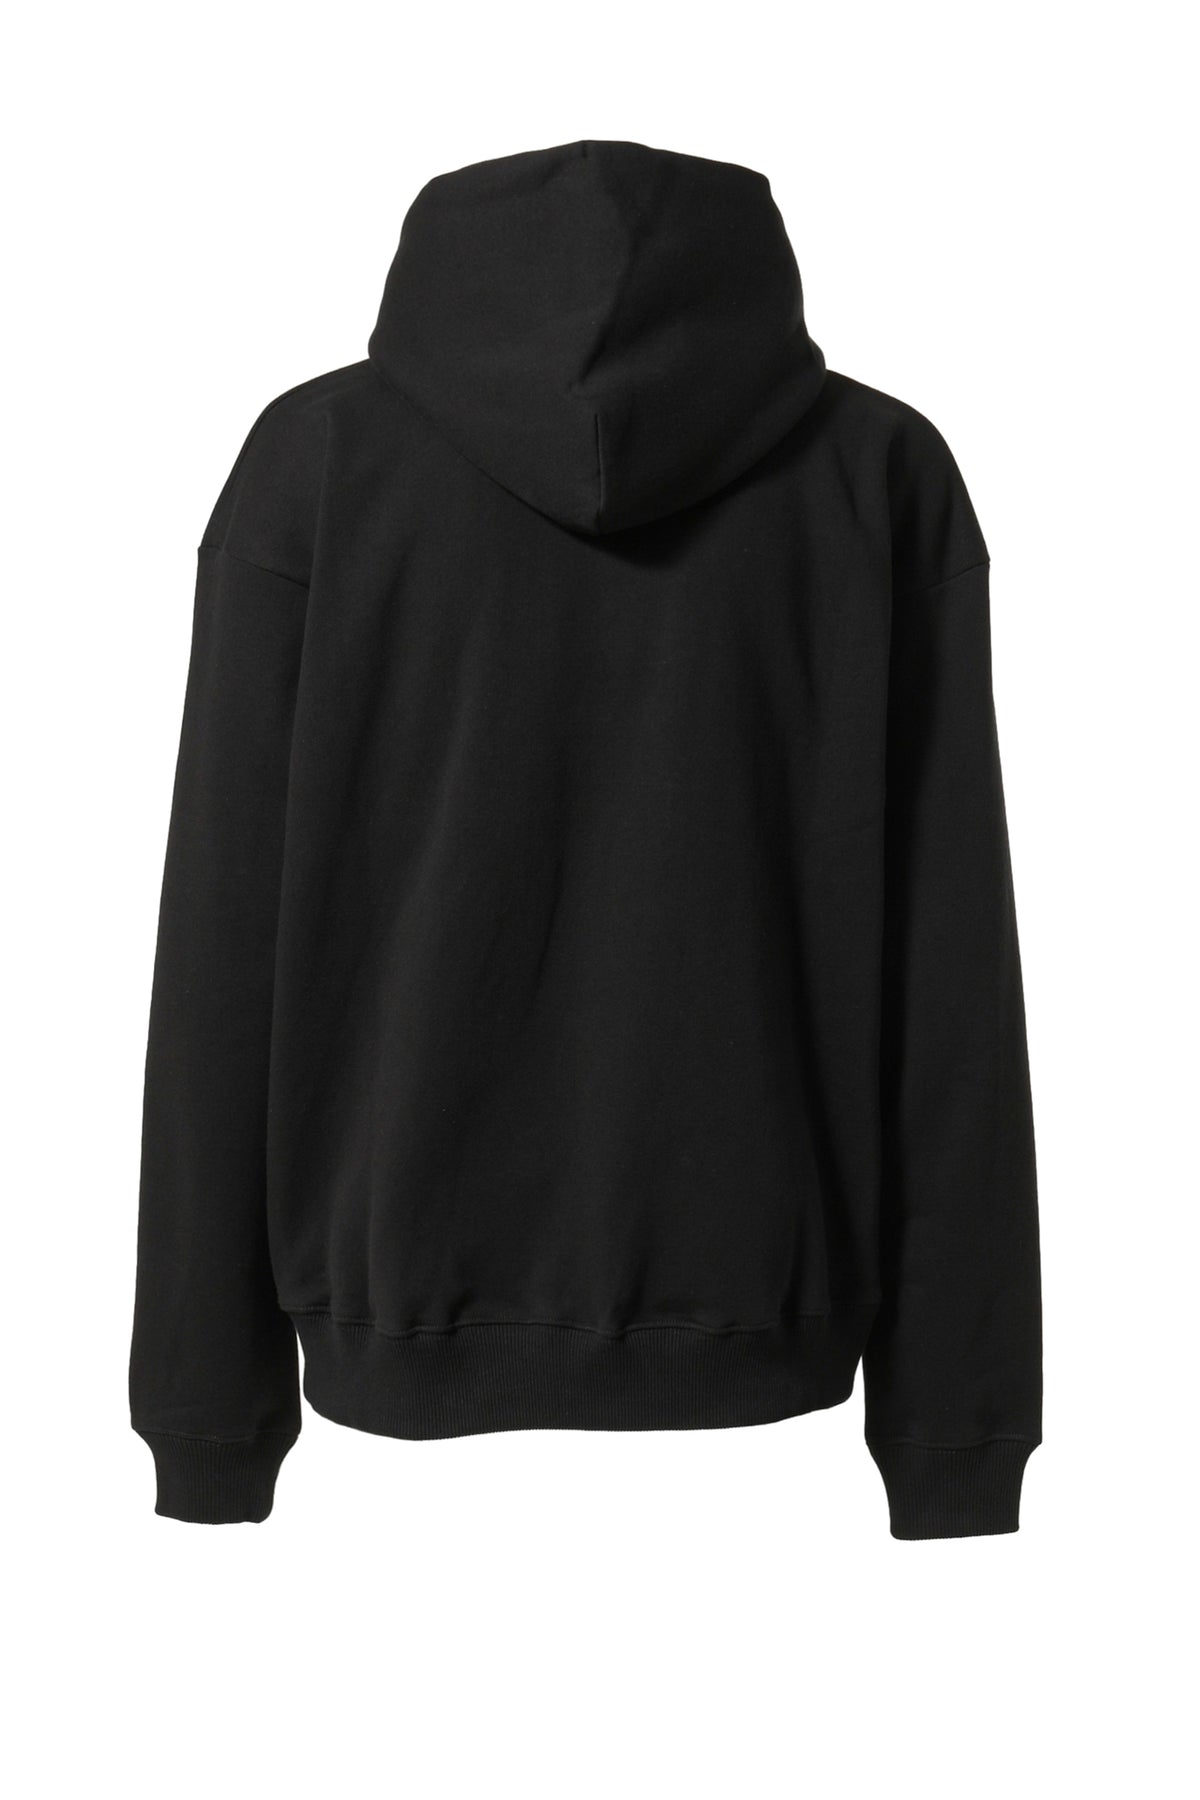 Martine Rose CLASSIC HOODIE / BLK BETTER DAYS BUNNY